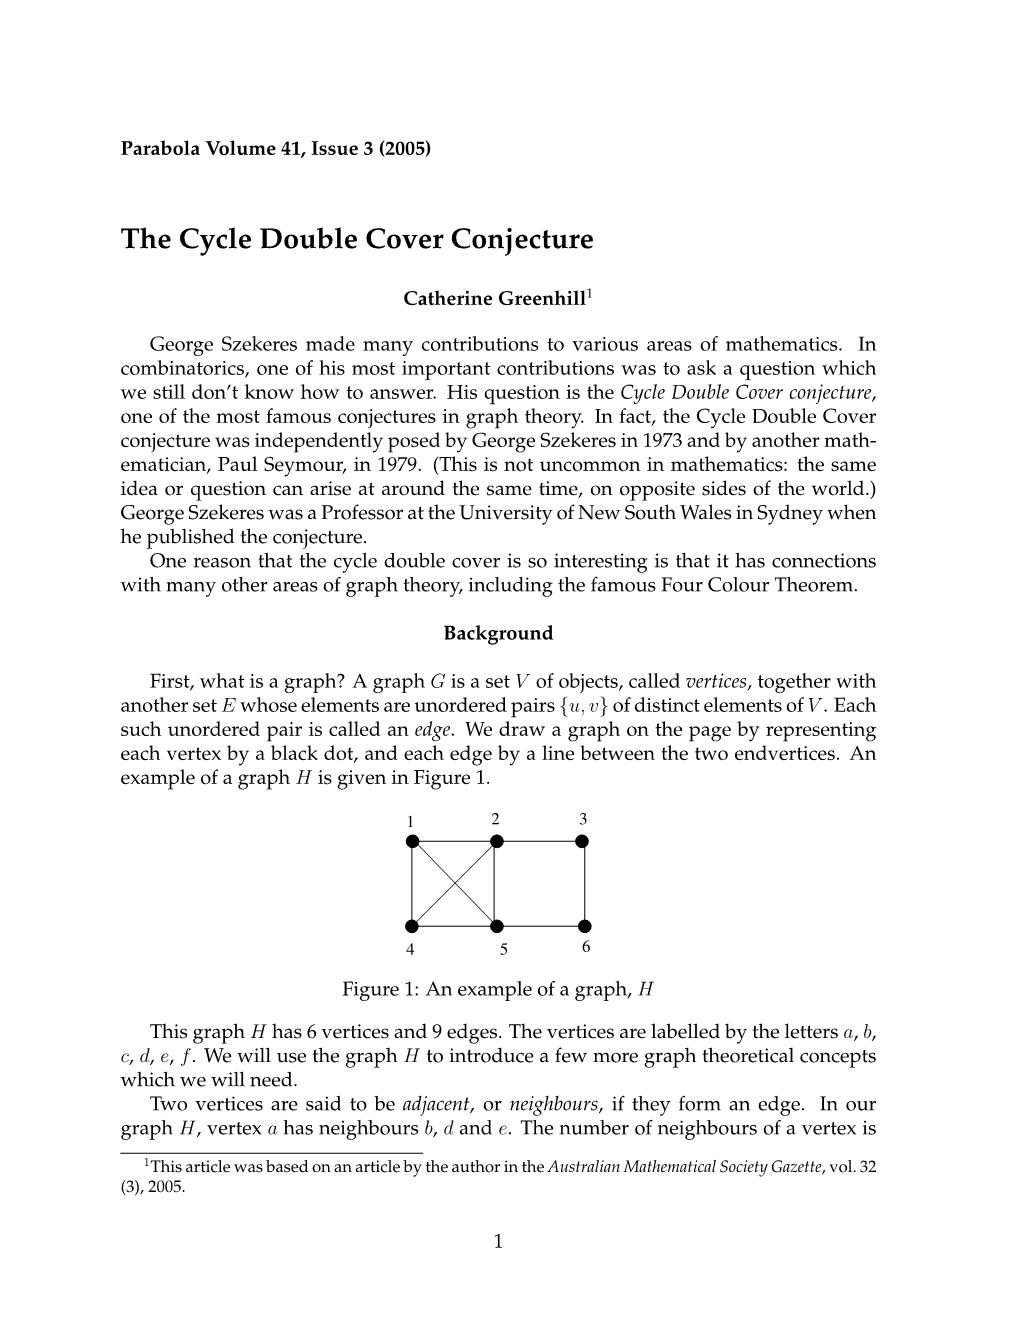 The Cycle Double Cover Conjecture